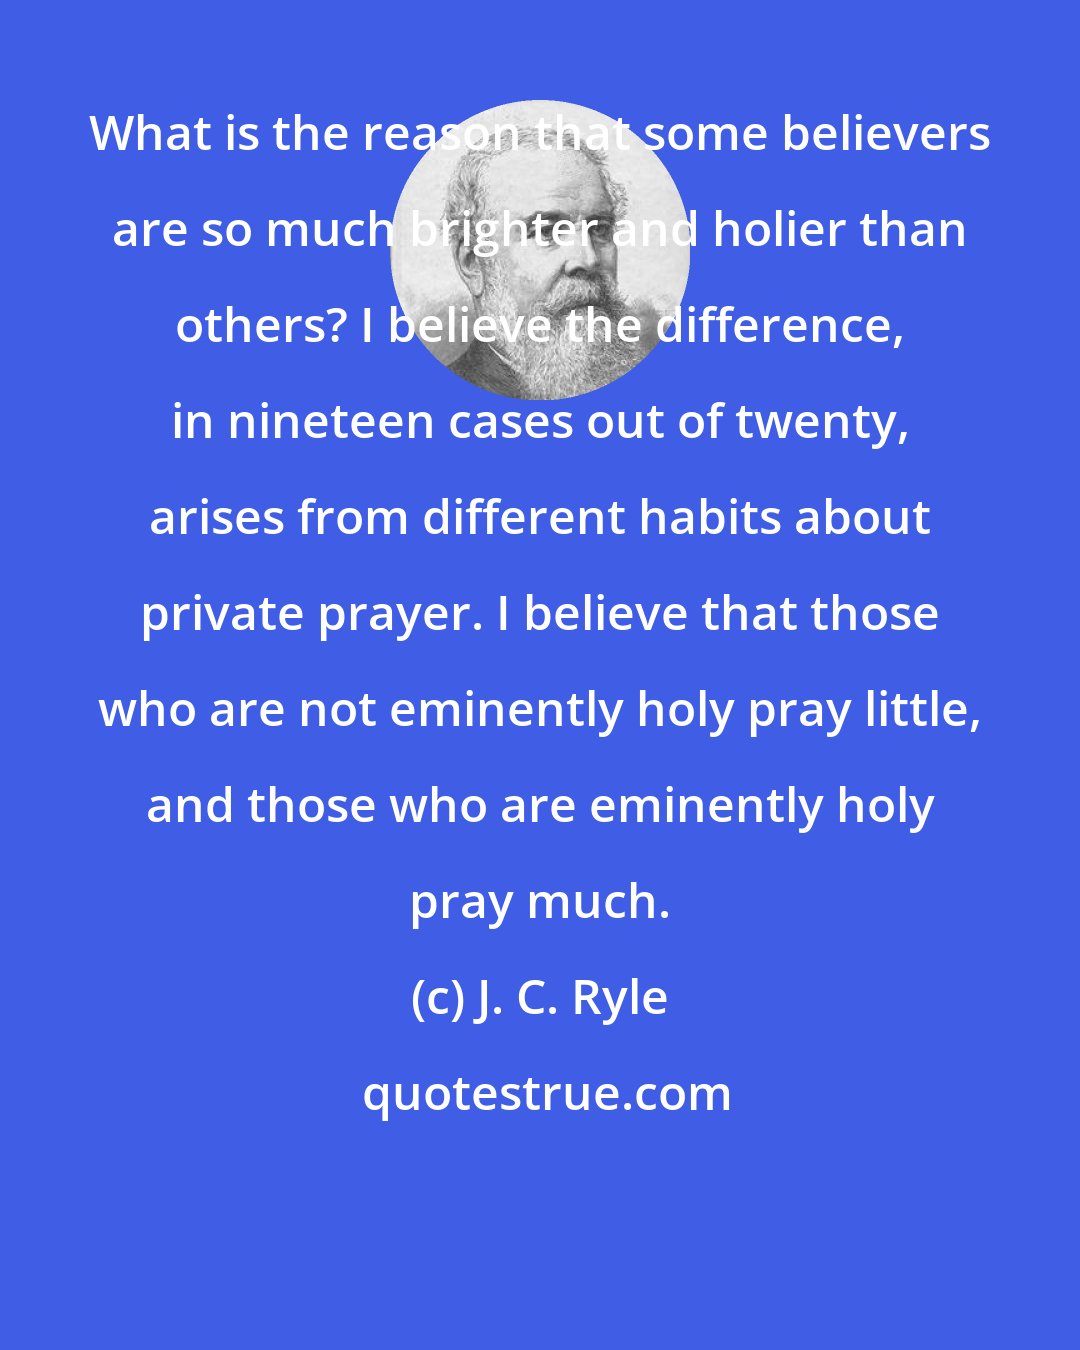 J. C. Ryle: What is the reason that some believers are so much brighter and holier than others? I believe the difference, in nineteen cases out of twenty, arises from different habits about private prayer. I believe that those who are not eminently holy pray little, and those who are eminently holy pray much.